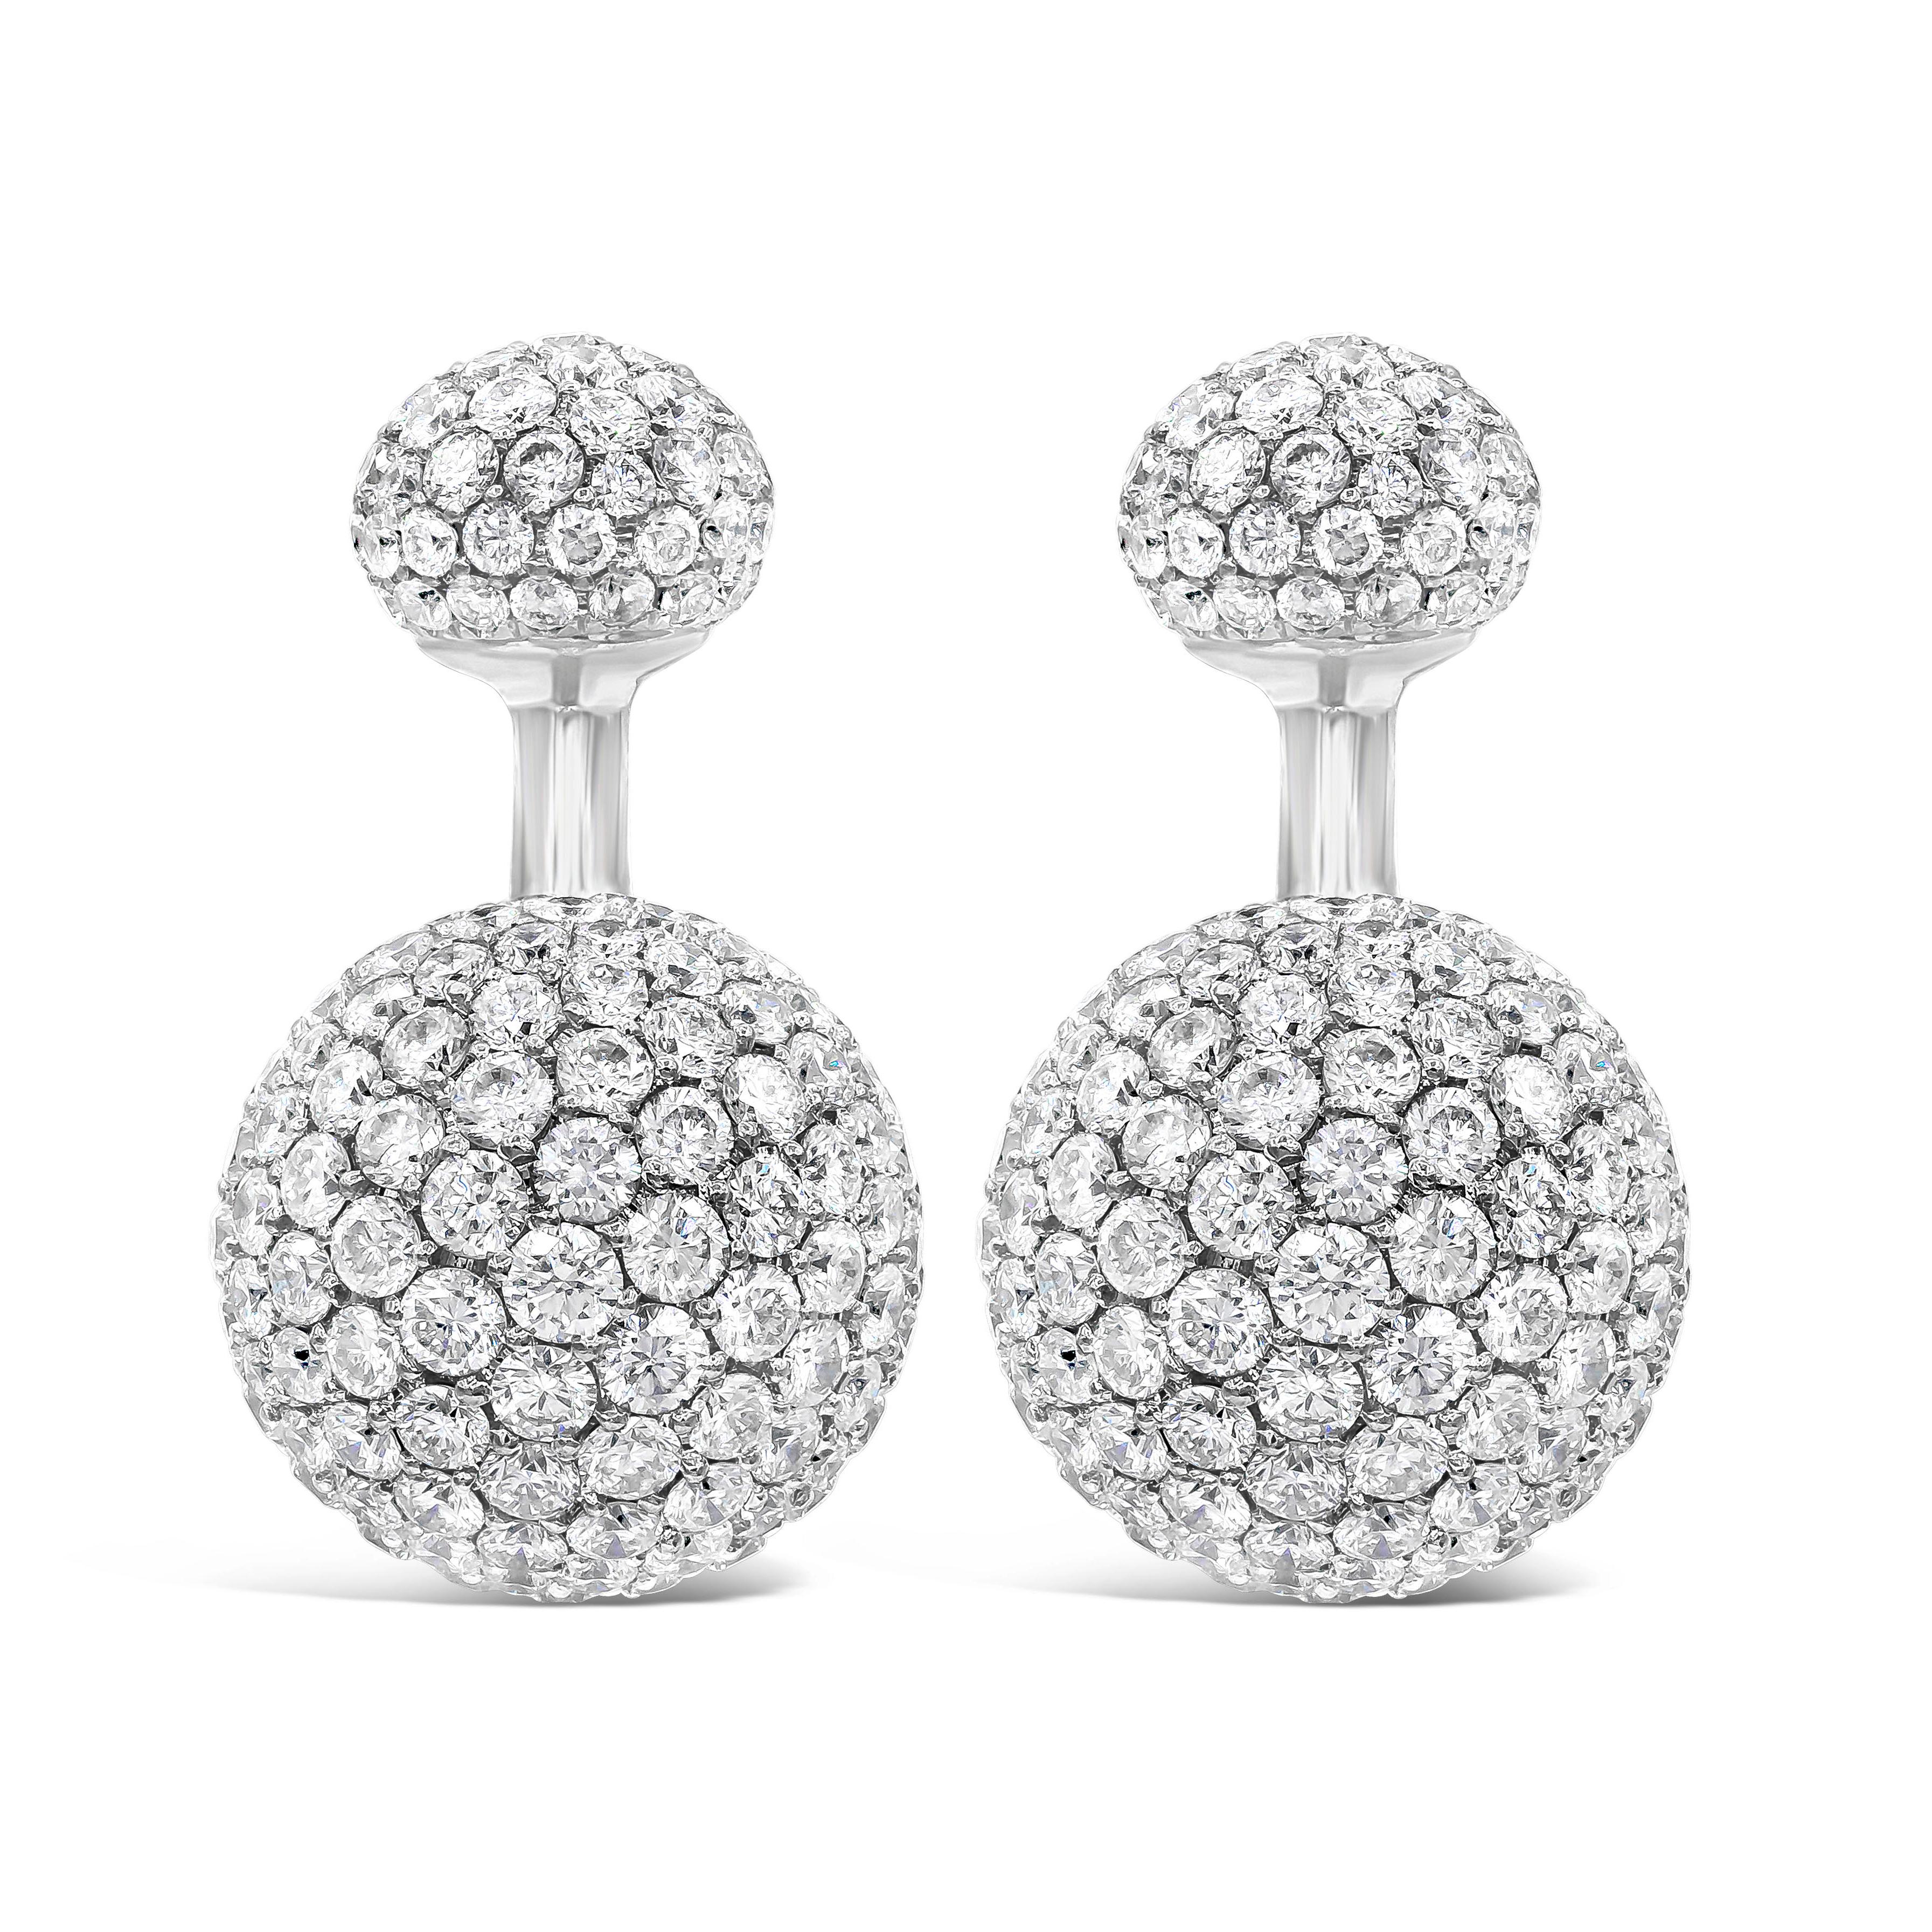 An intricately designed 18k white gold cufflinks showcasing a diamond encrusted face. The ball return back also micro-pave set with sparkling diamonds. Diamonds weigh 6.08 carats total. 

Style available in different price ranges. Prices are based